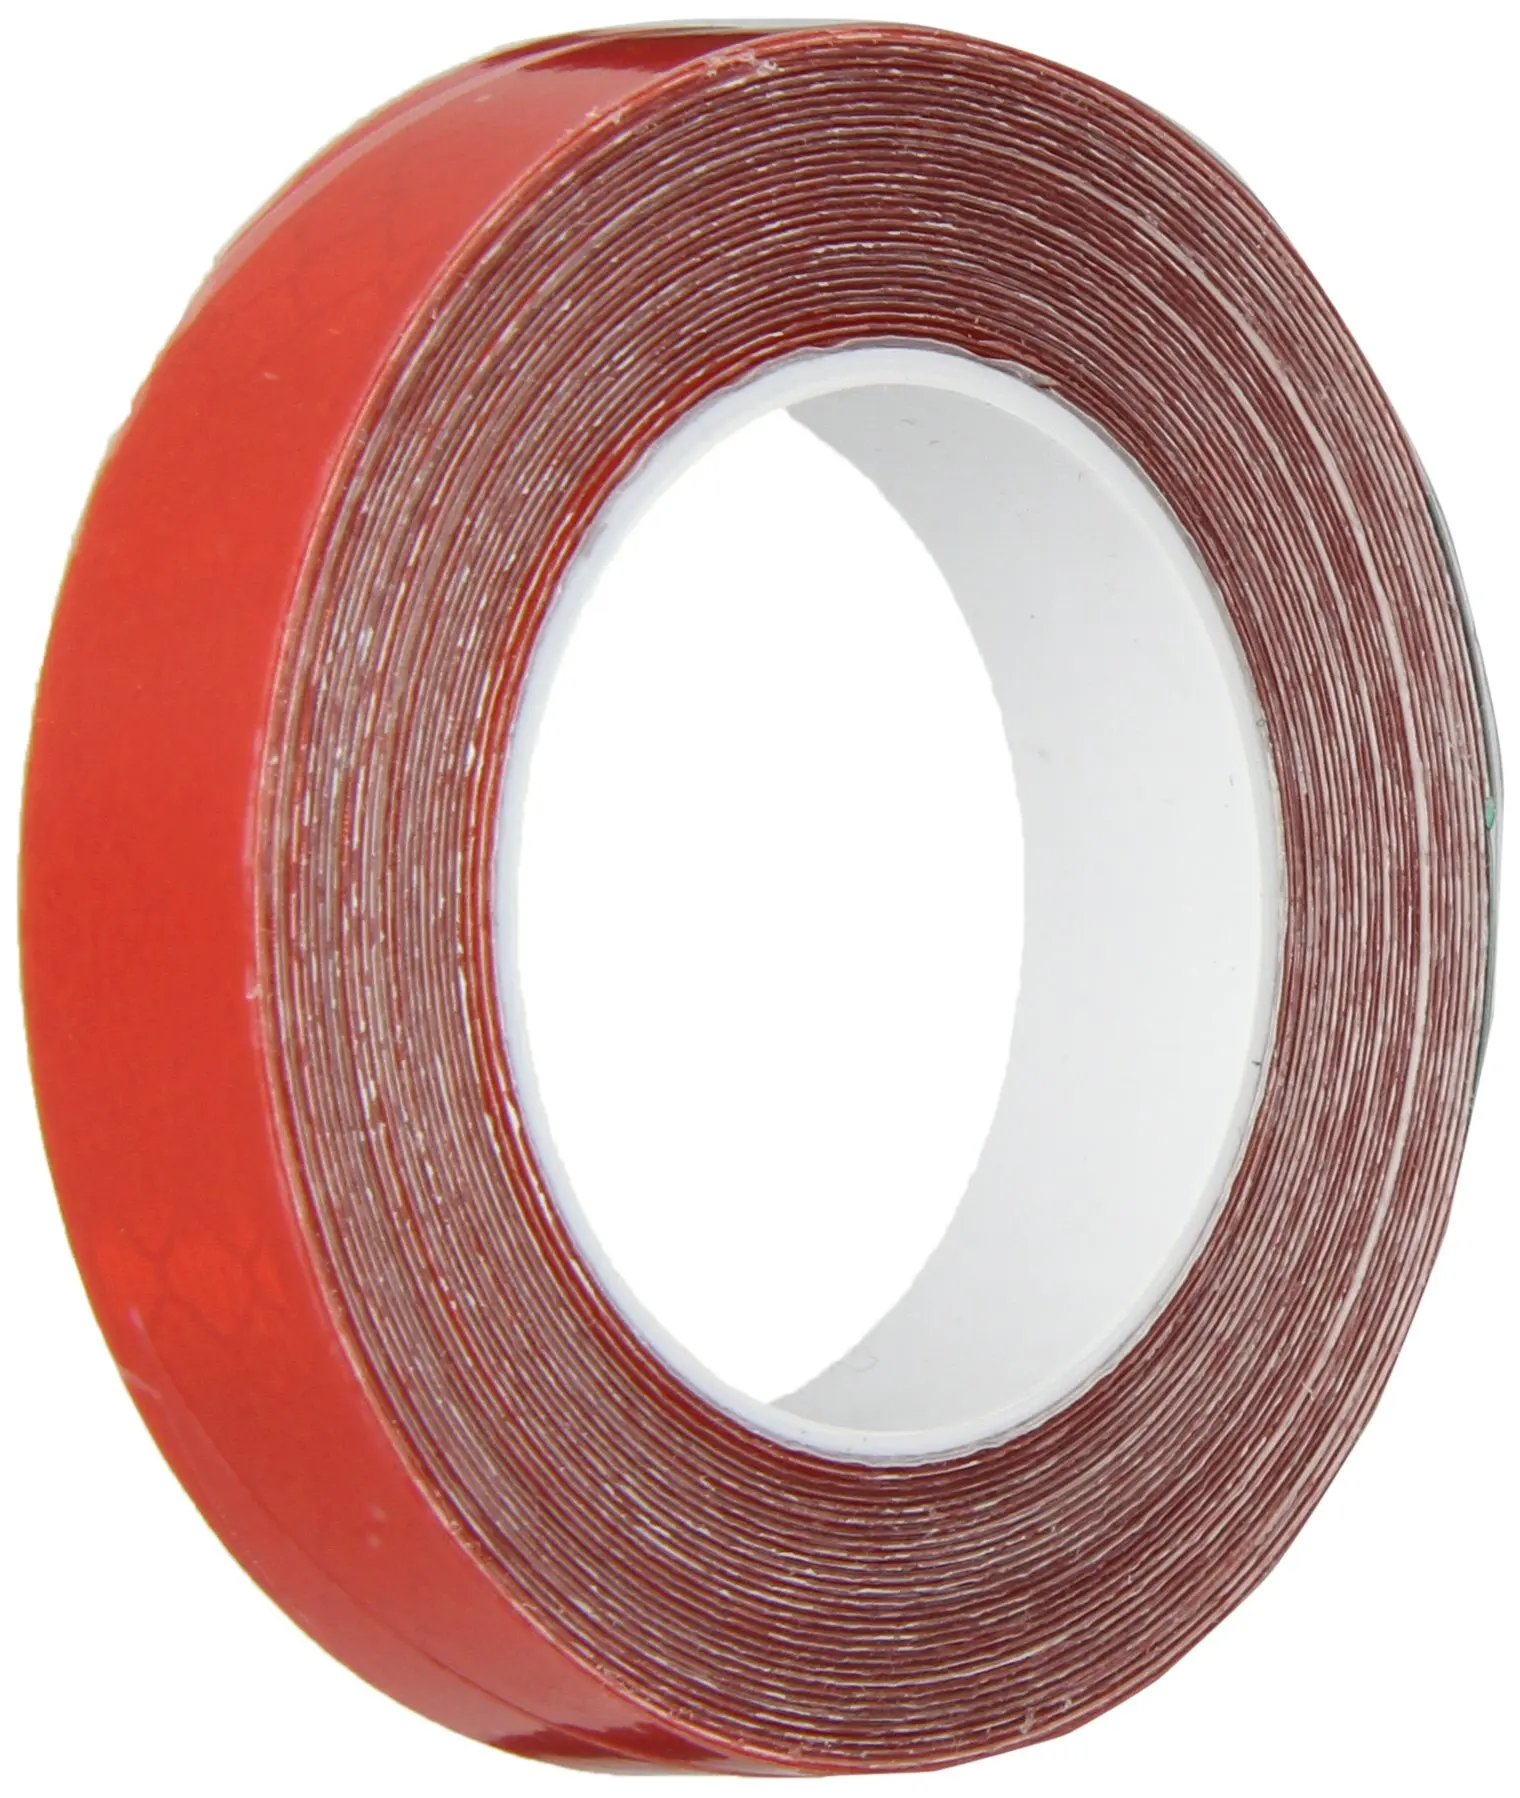 Buy 3M 3432 Red Micro Prismatic Sheeting Reflective Tape, 0.5" X 5yd (1 Roll) in Cheap Price on